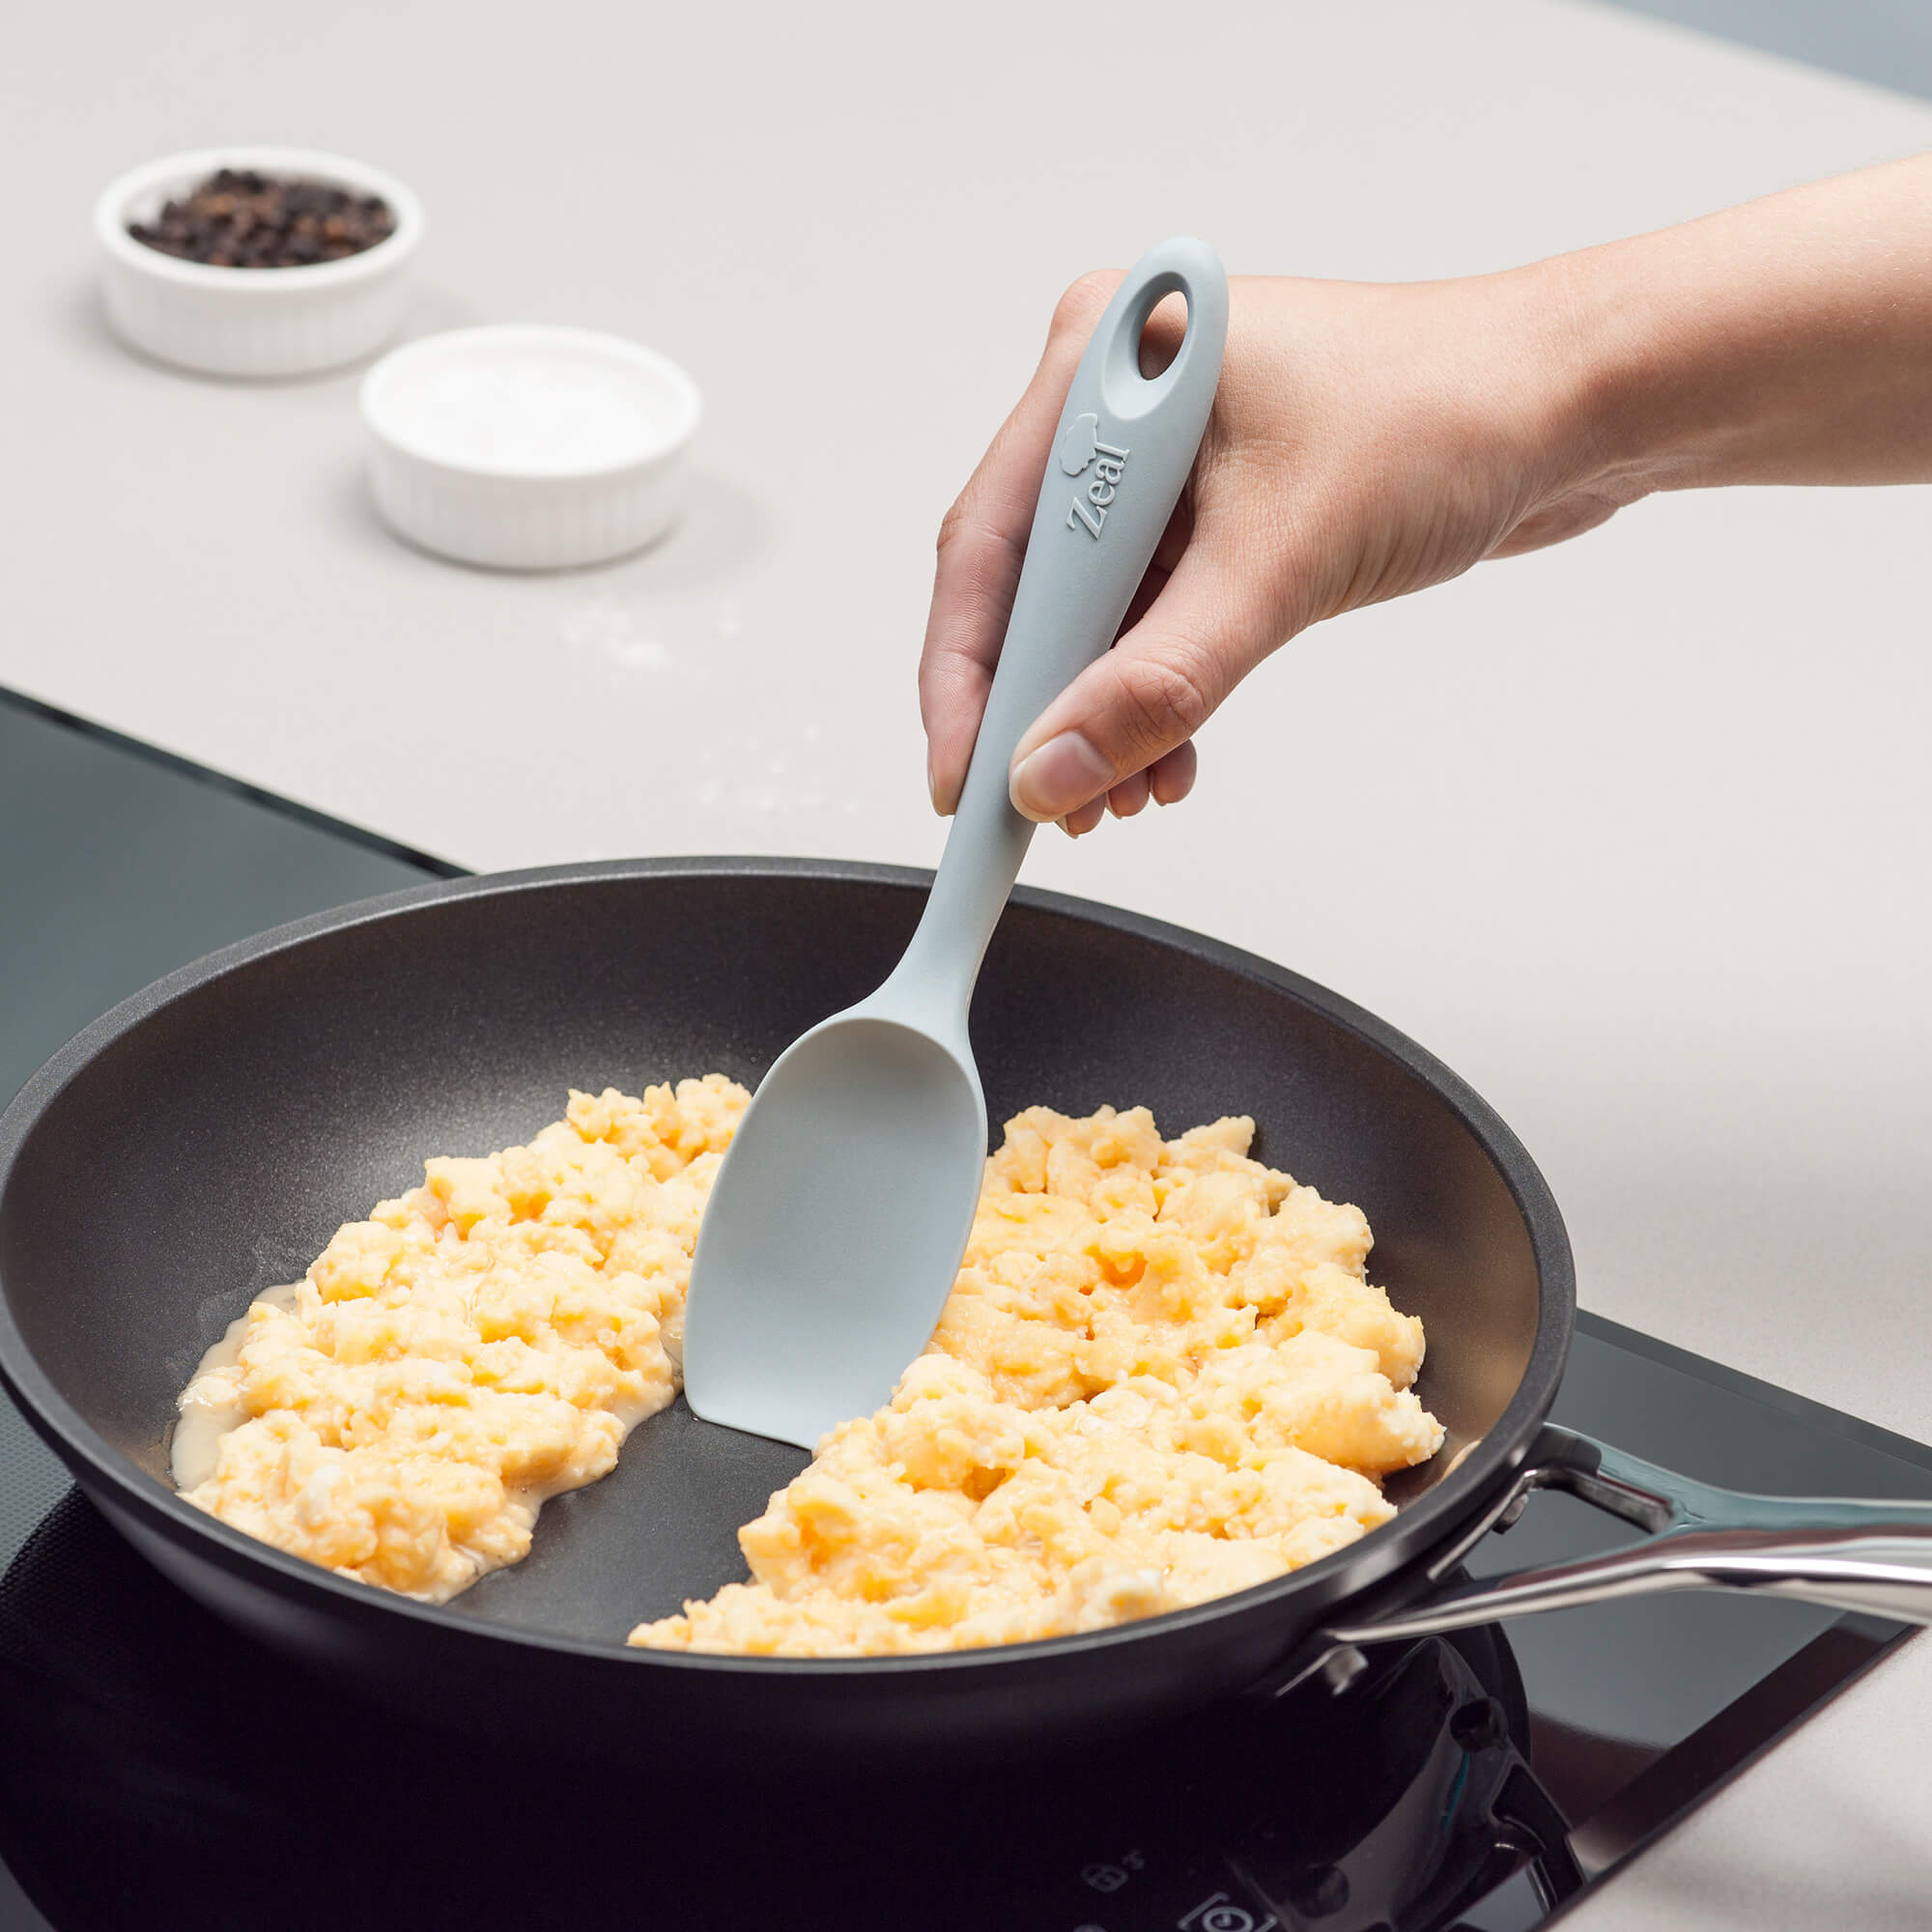 Using a Zeal Silicone Spatula Spoon to cook scrambled egg